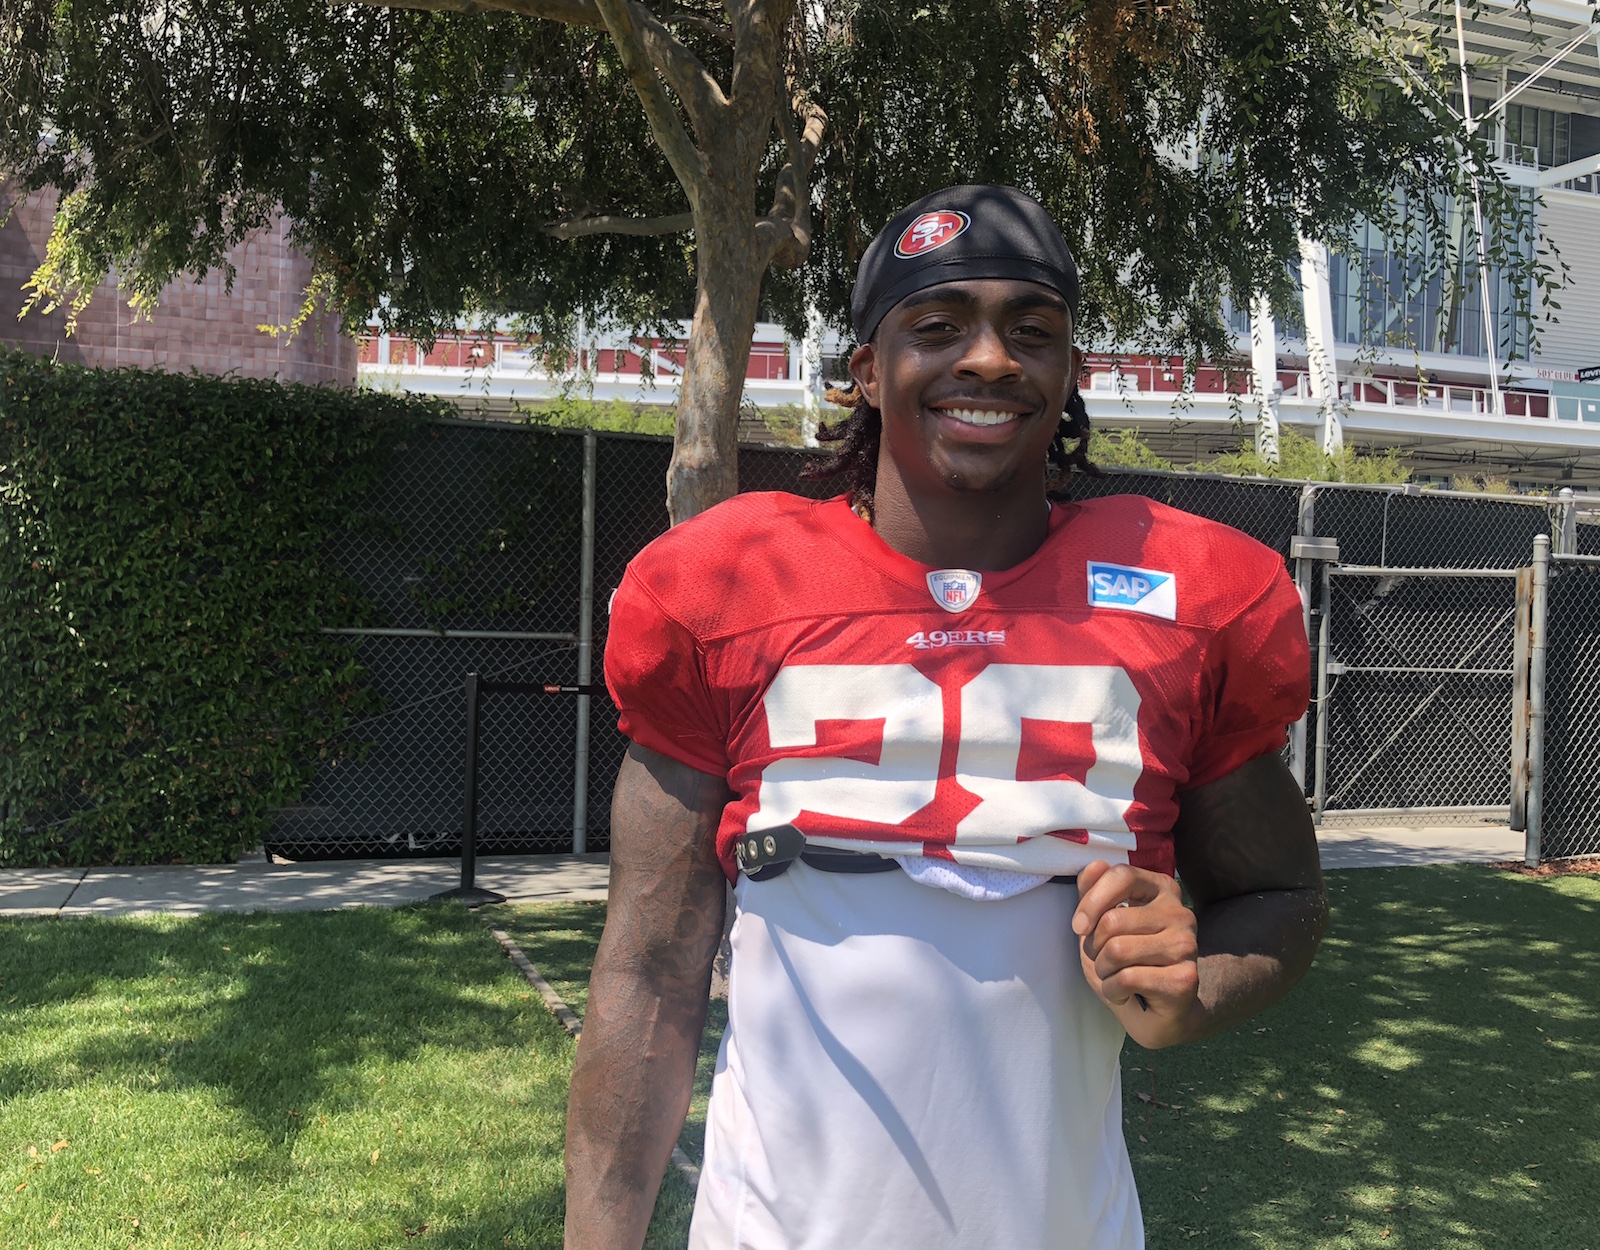 McKinnon to Have MRI on Right Knee, Other Fangirl Thoughts from 49ers Training Camp